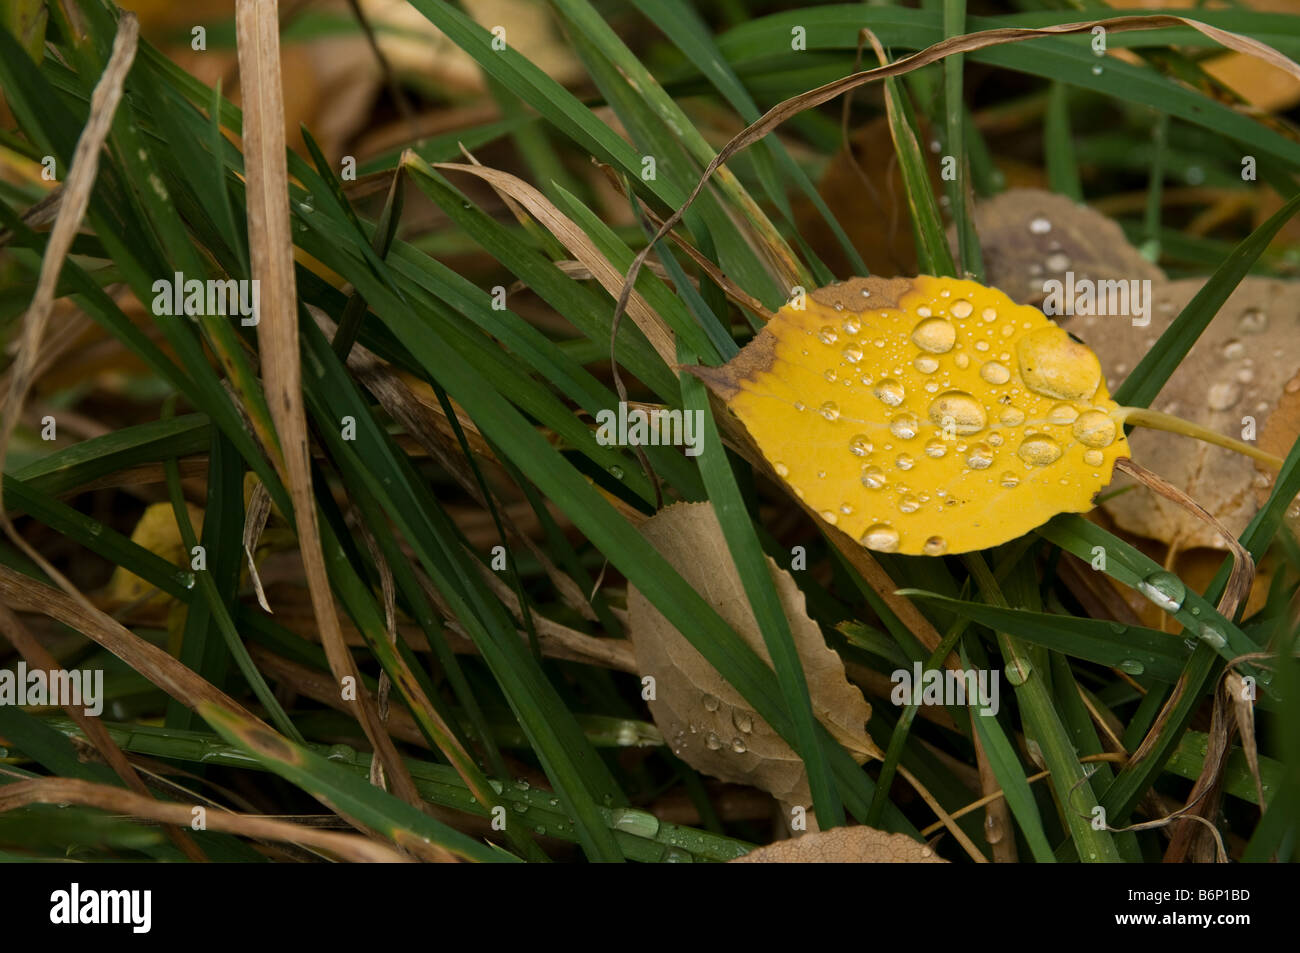 Golden Aspen leaf laying on green grass with fresh dew drops near Boulder Colorado. Stock Photo